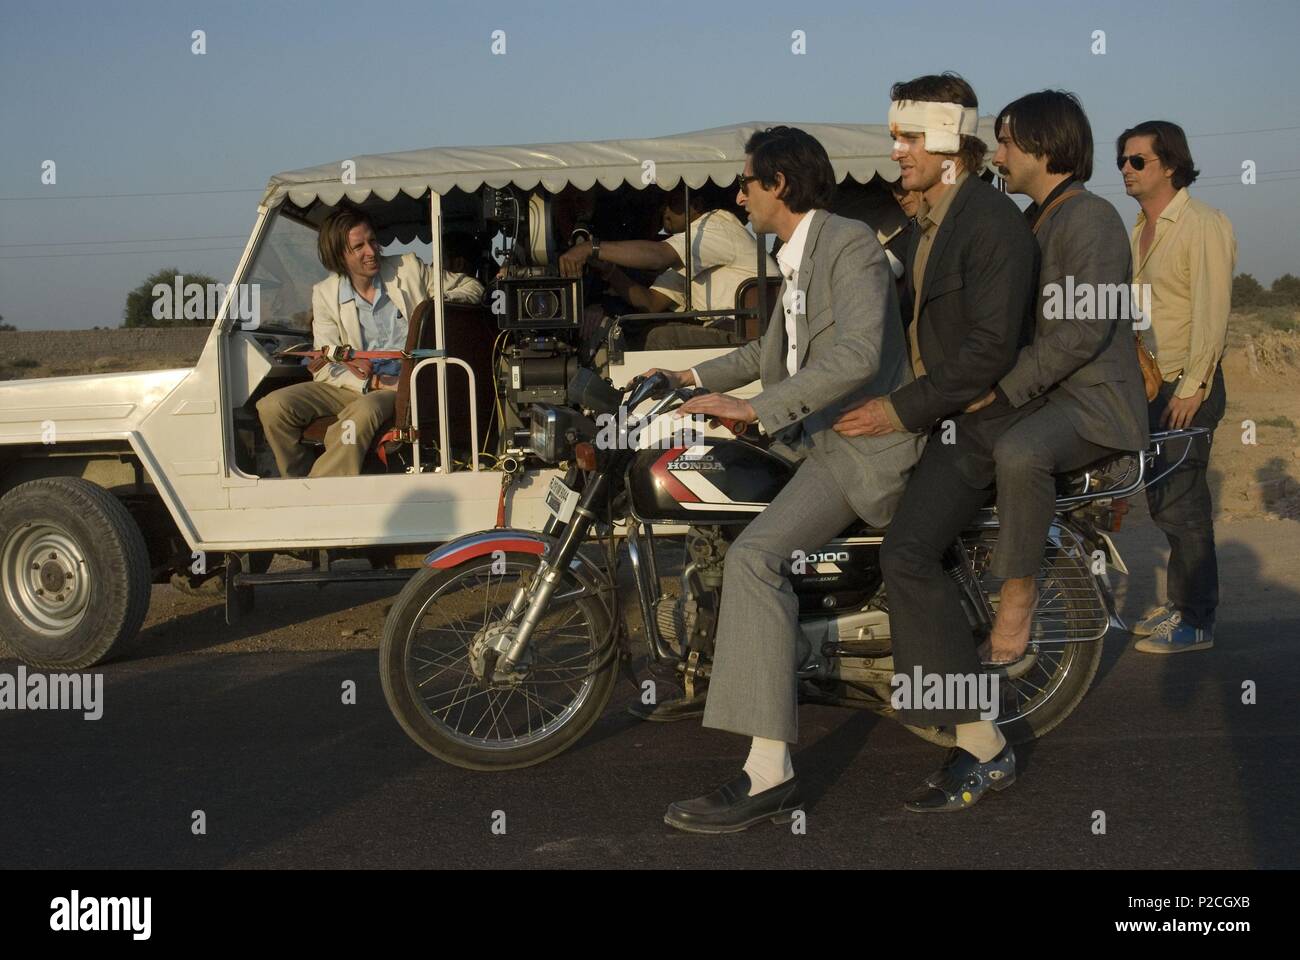 From the Archives: The Darjeeling Limited